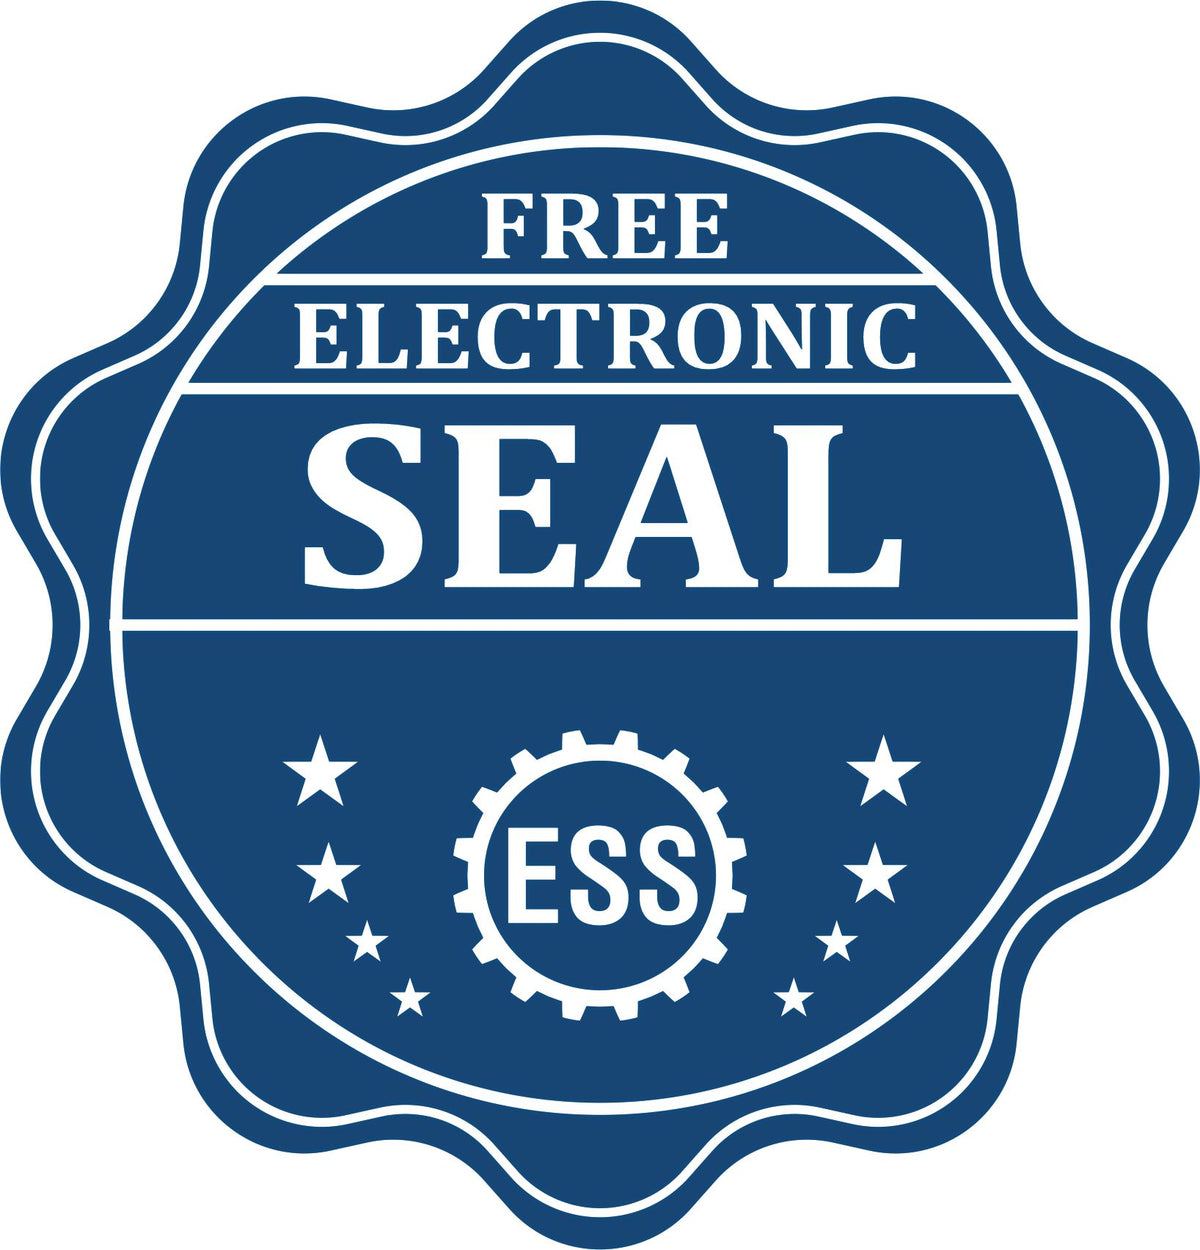 A badge showing a free electronic seal for the Slim Pre-Inked Arizona Landscape Architect Seal Stamp with stars and the ESS gear on the emblem.